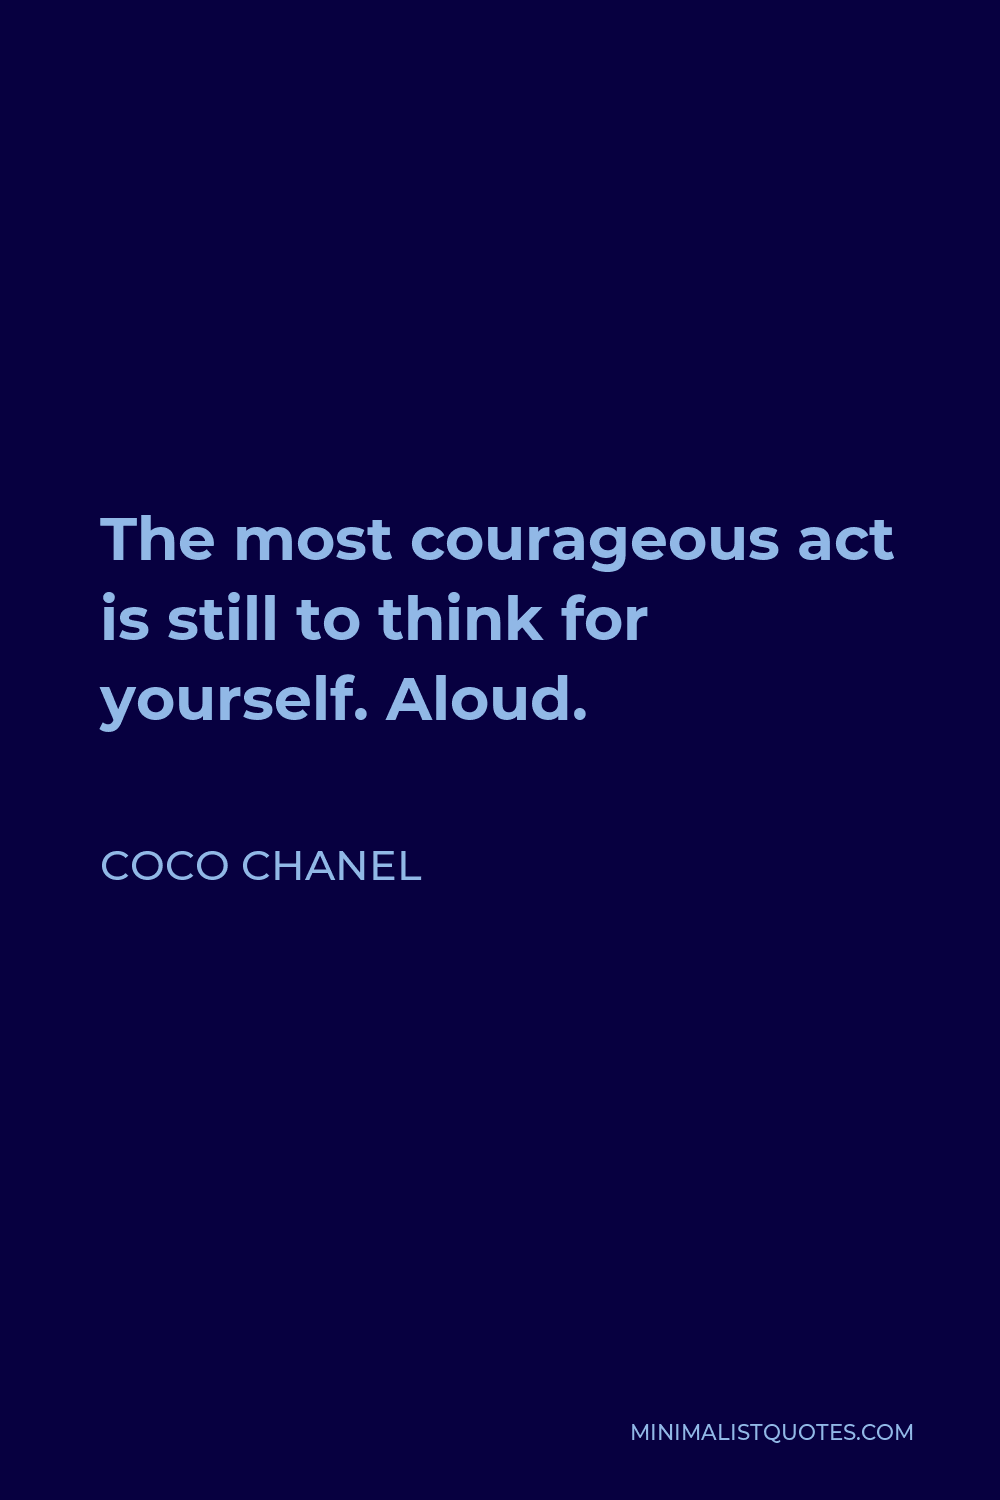 Coco Chanel Quote - The most courageous act is still to think for yourself. Aloud.